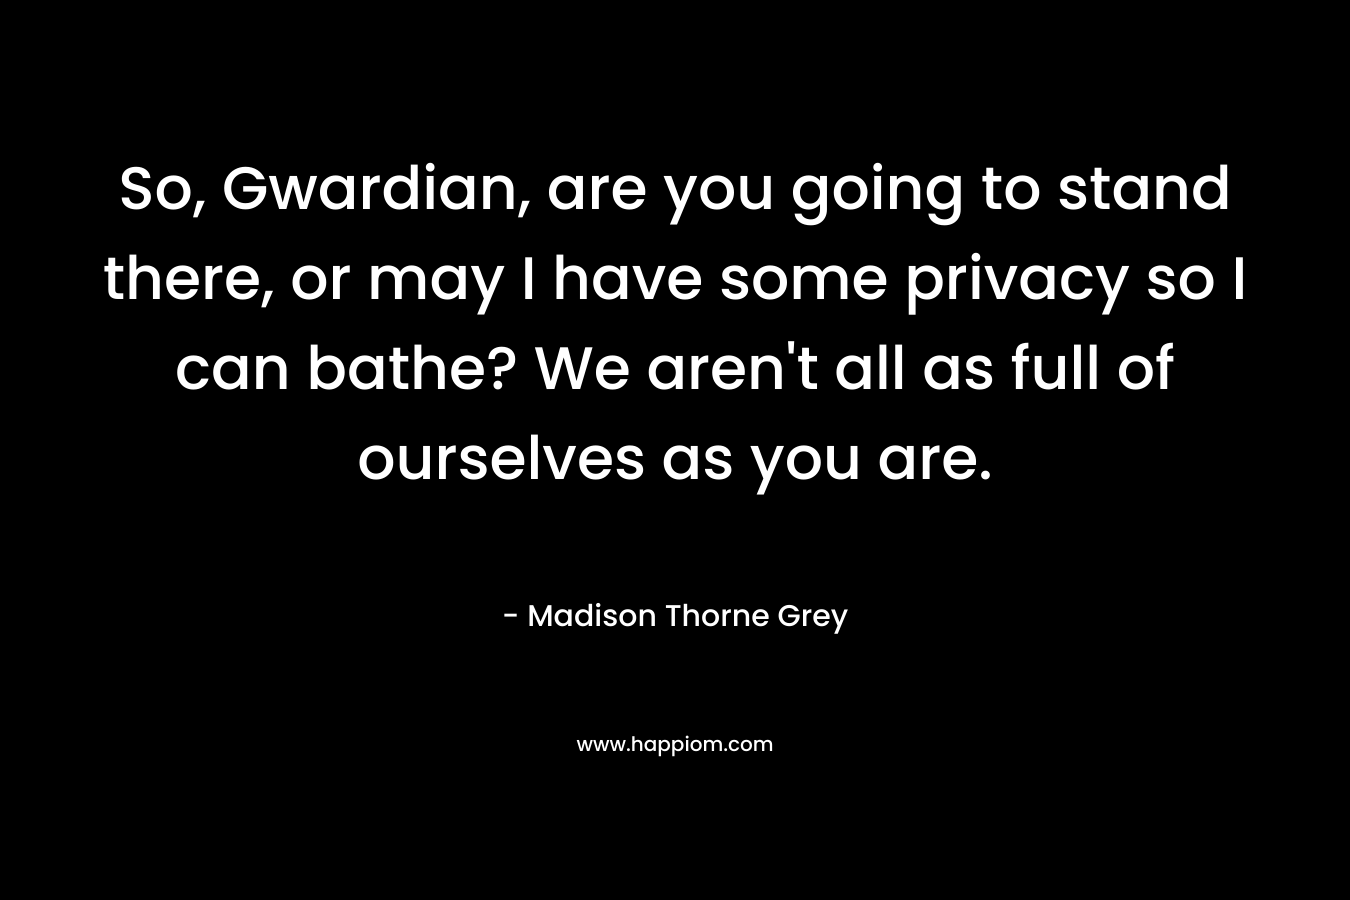 So, Gwardian, are you going to stand there, or may I have some privacy so I can bathe? We aren’t all as full of ourselves as you are. – Madison Thorne Grey